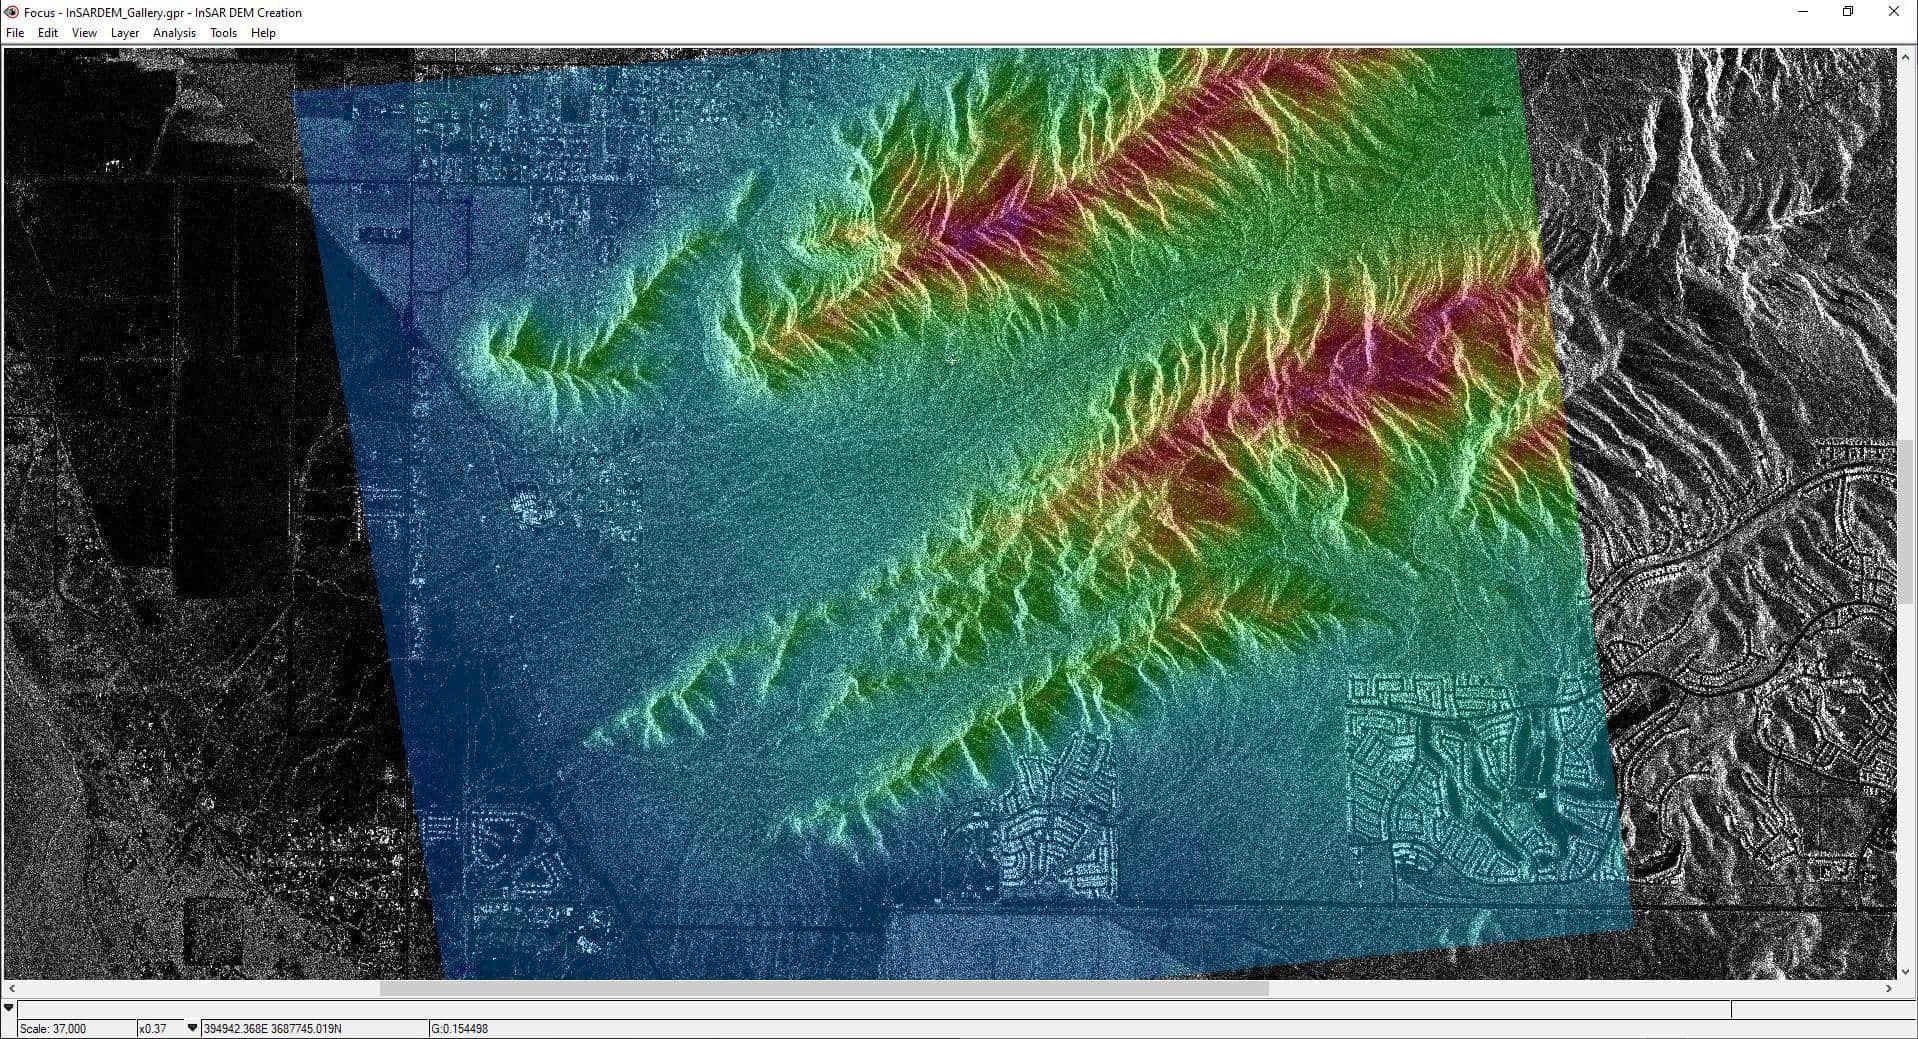 Example of an INSAR image